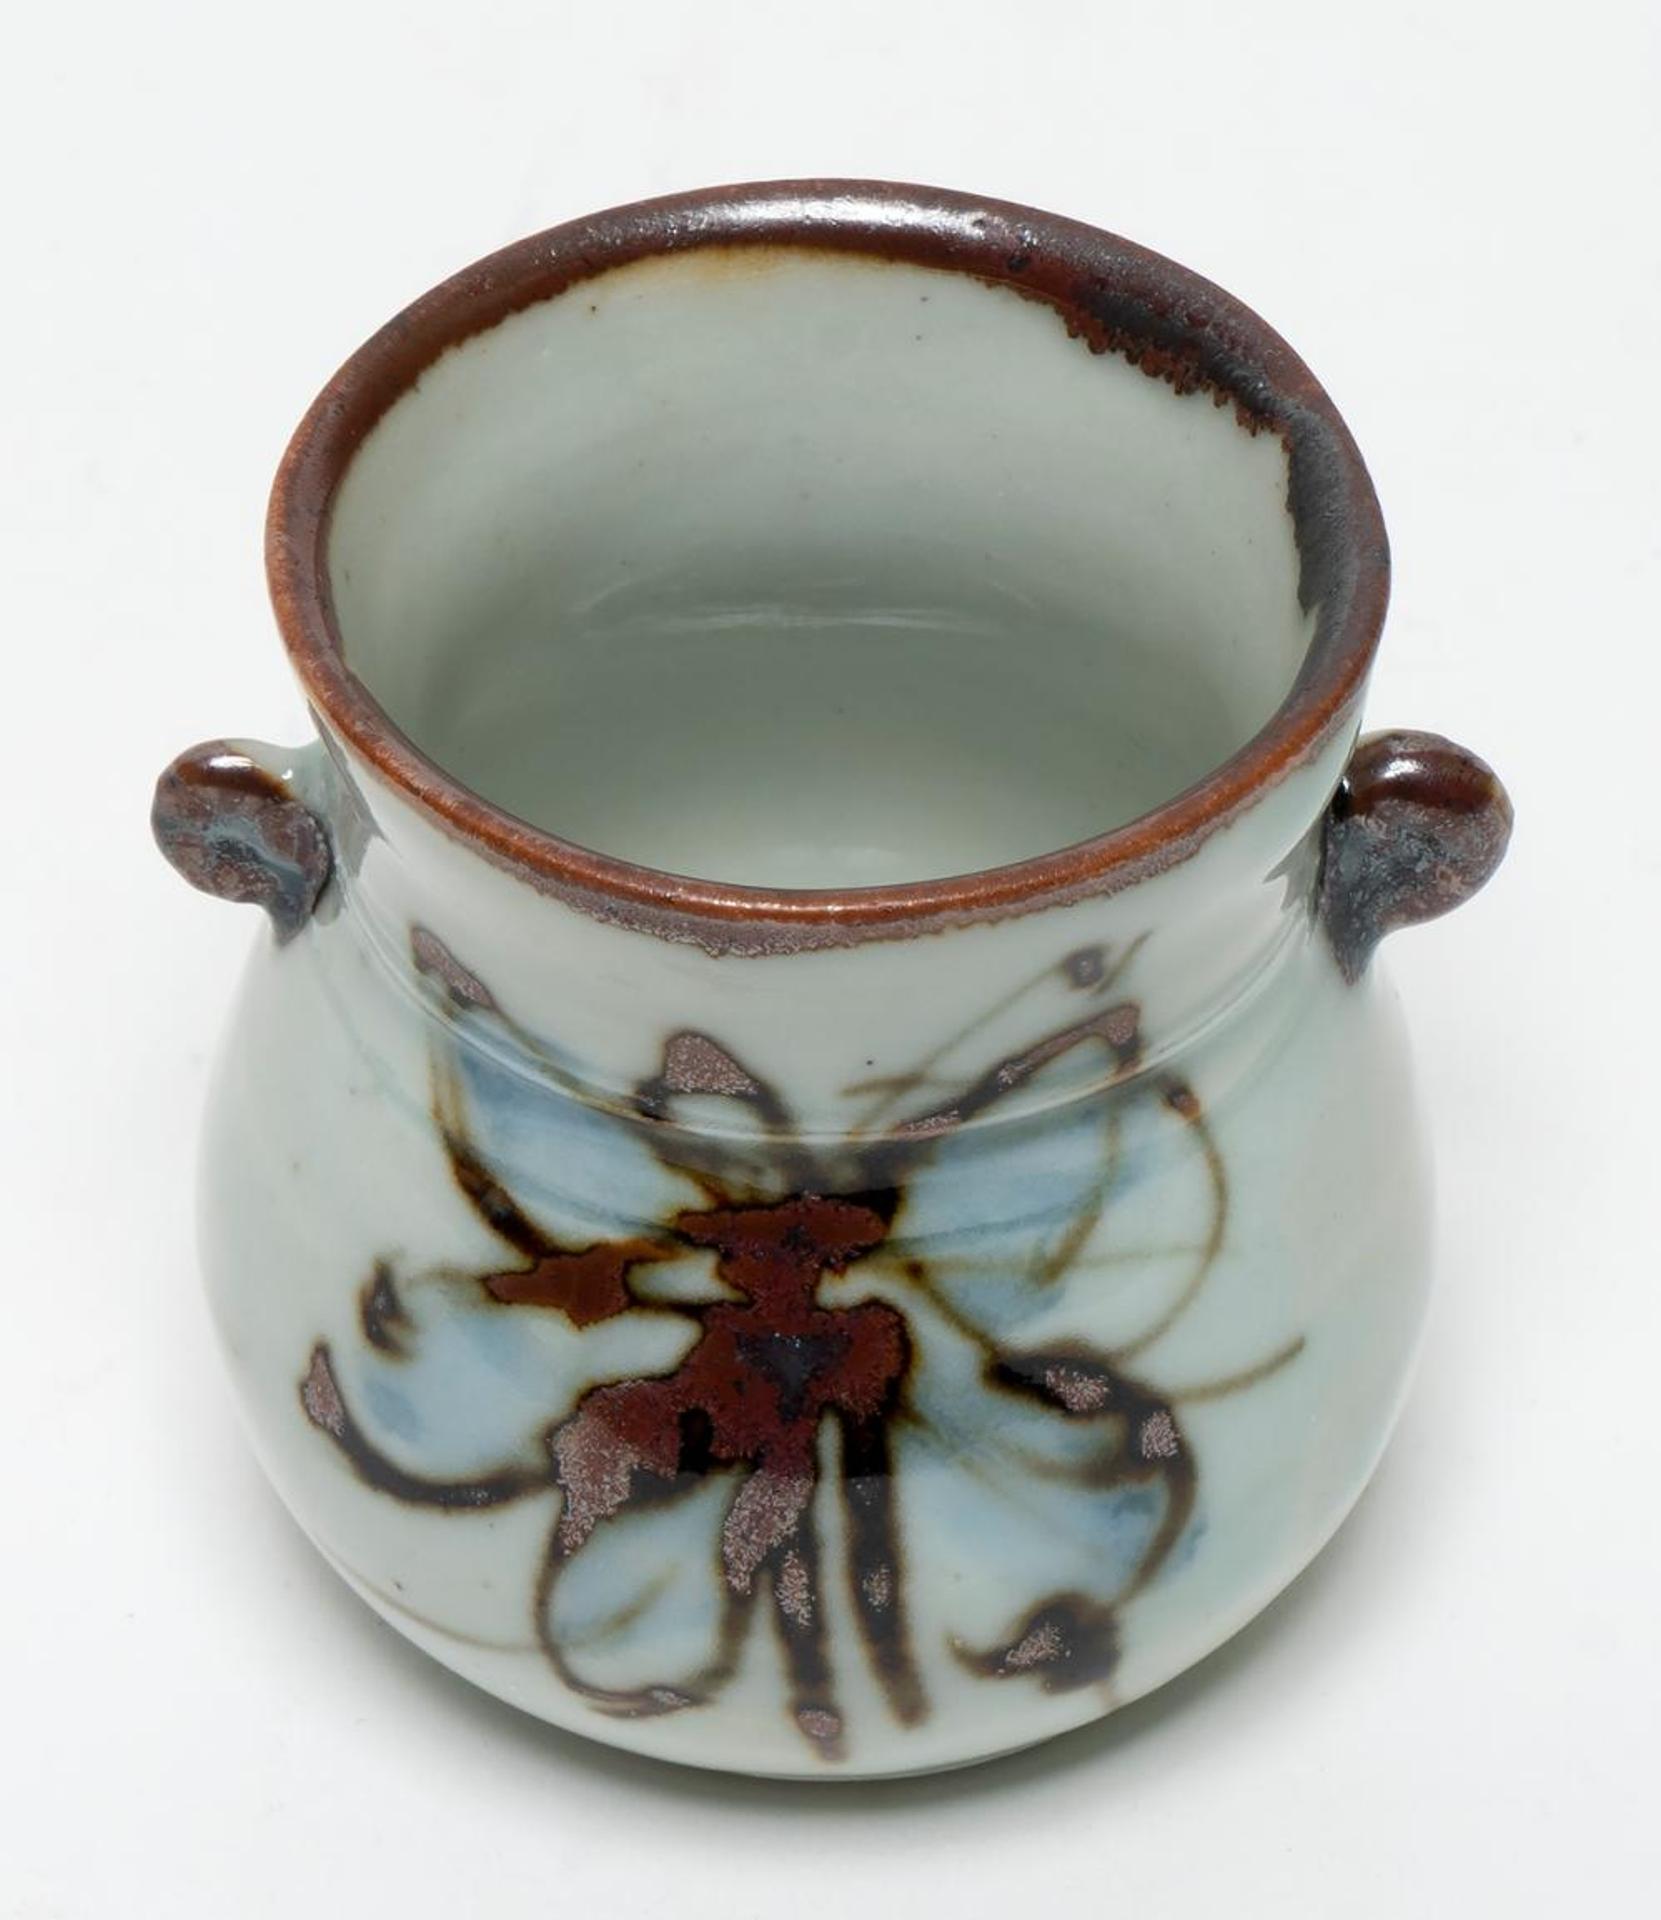 Jack Sures (1934-2018) - Miniature White and Brown Vessel with Minimalist Handles